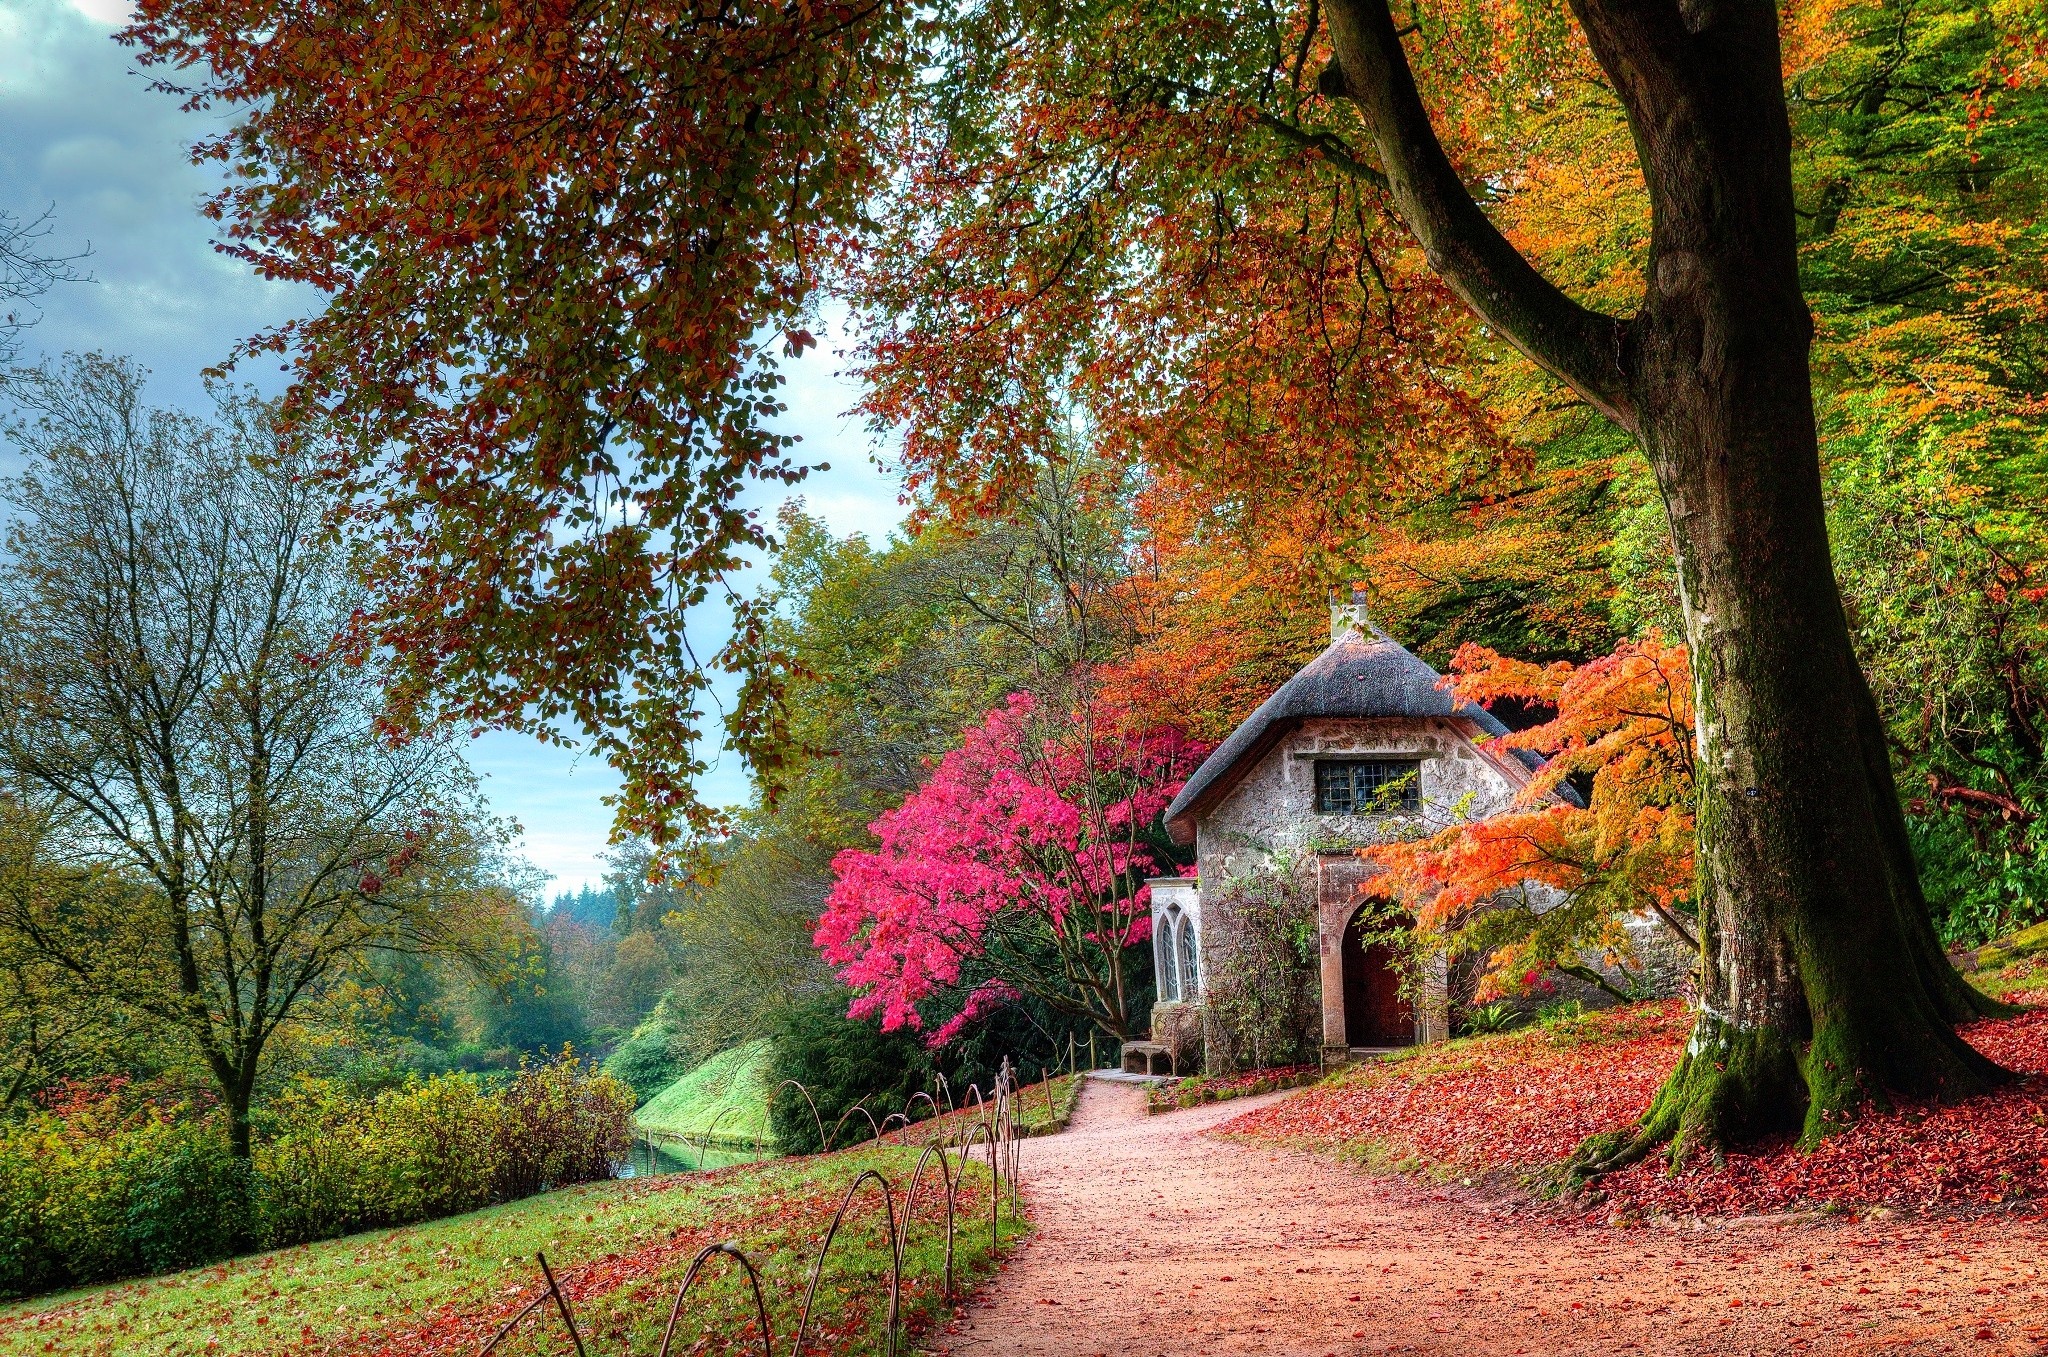 General 2048x1357 fall garden cottage leaves trees shrubs pink green orange path moss nature landscape dirt road